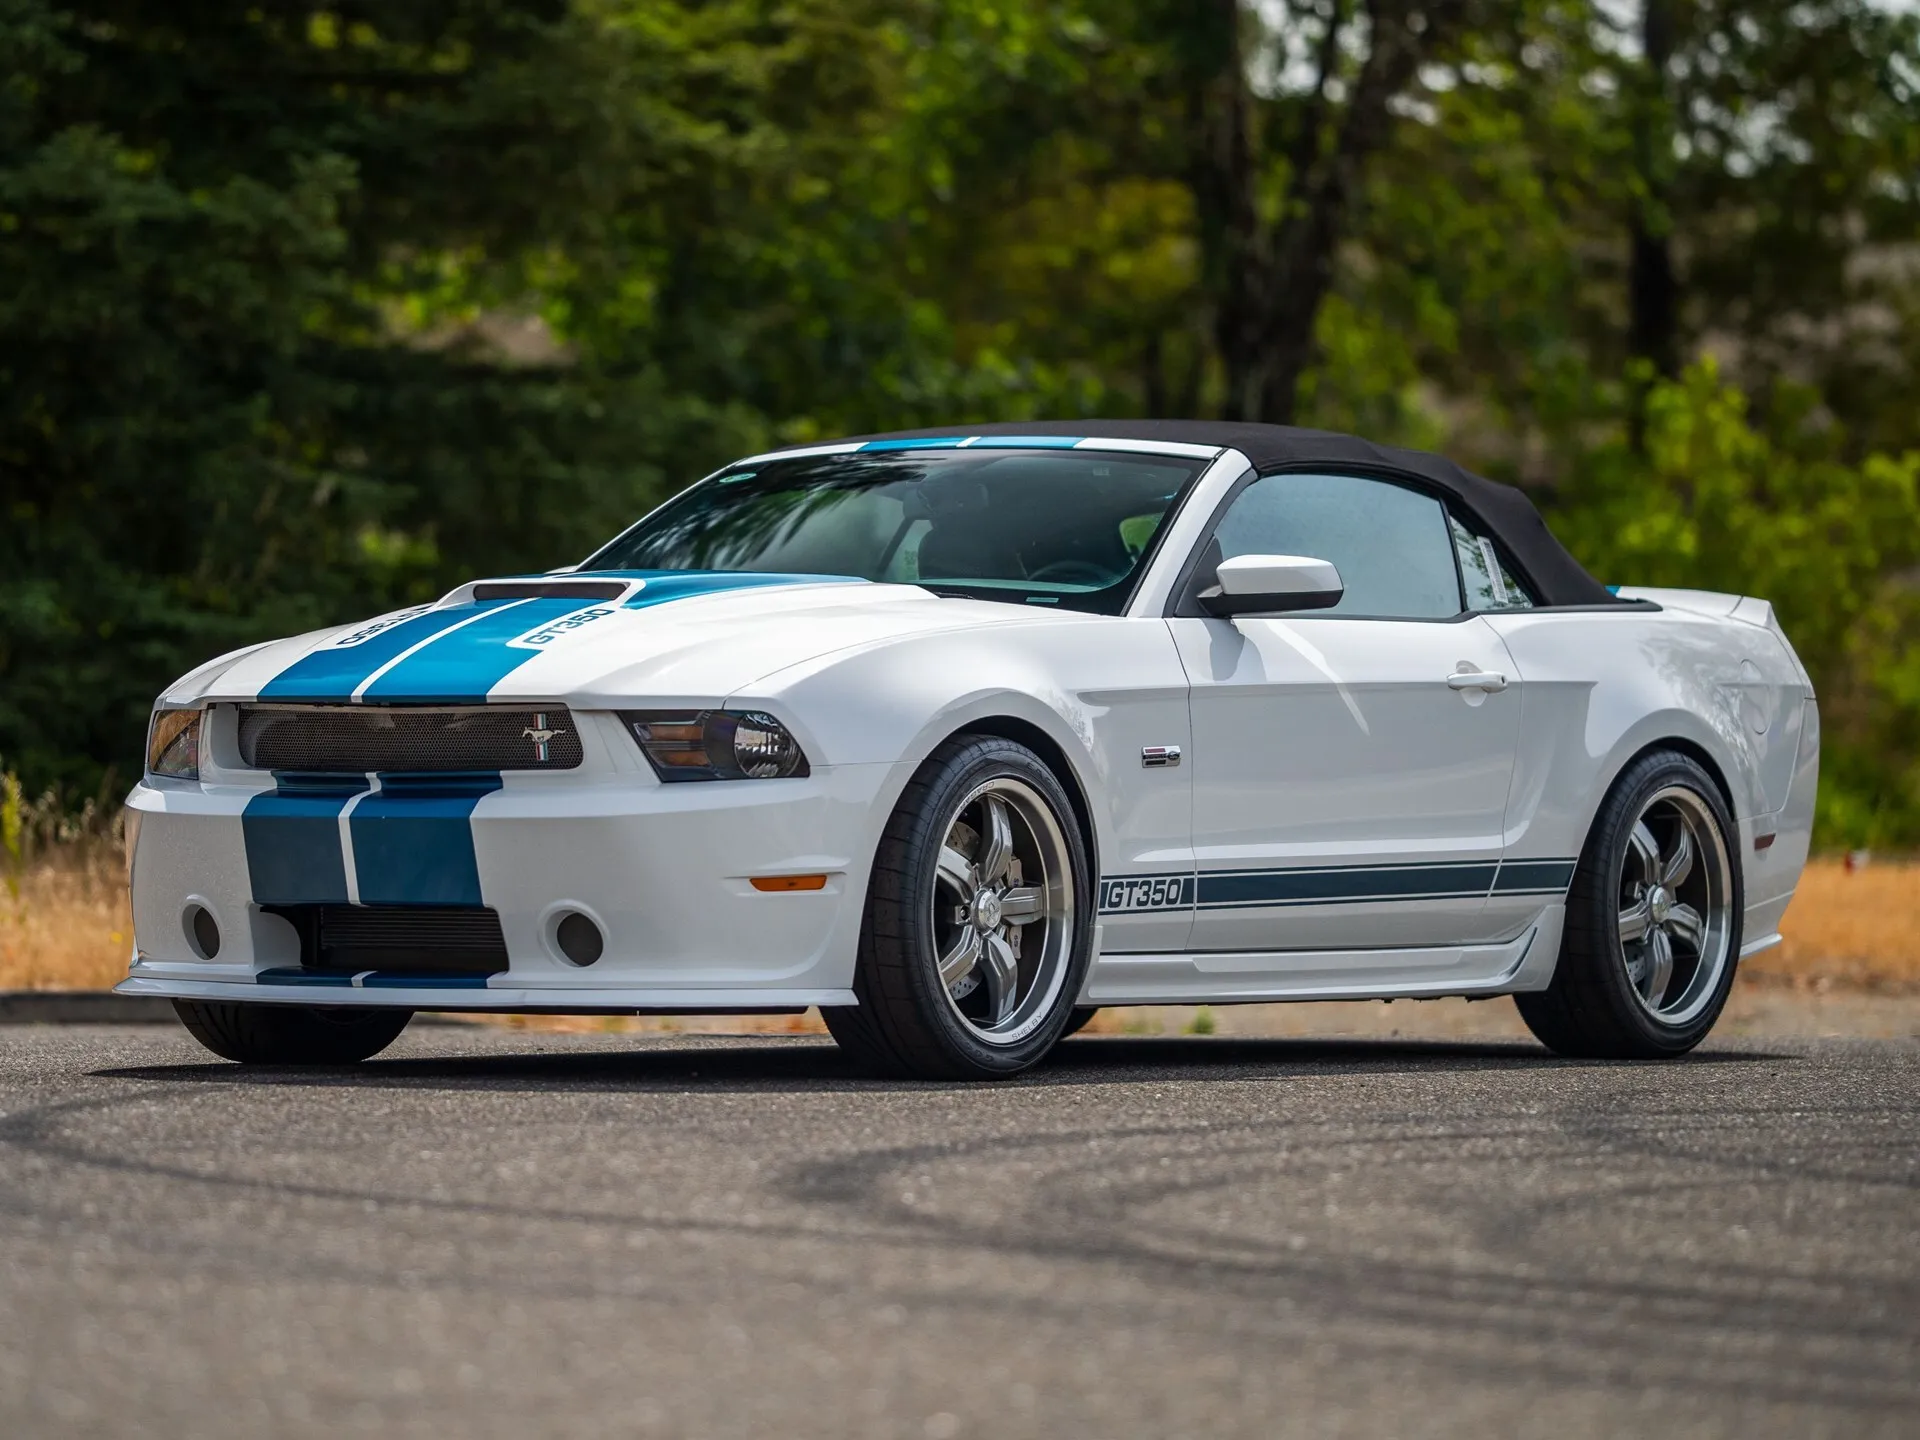 Mustang Of The Day: 2012 Ford Mustang Shelby GT350 Convertible